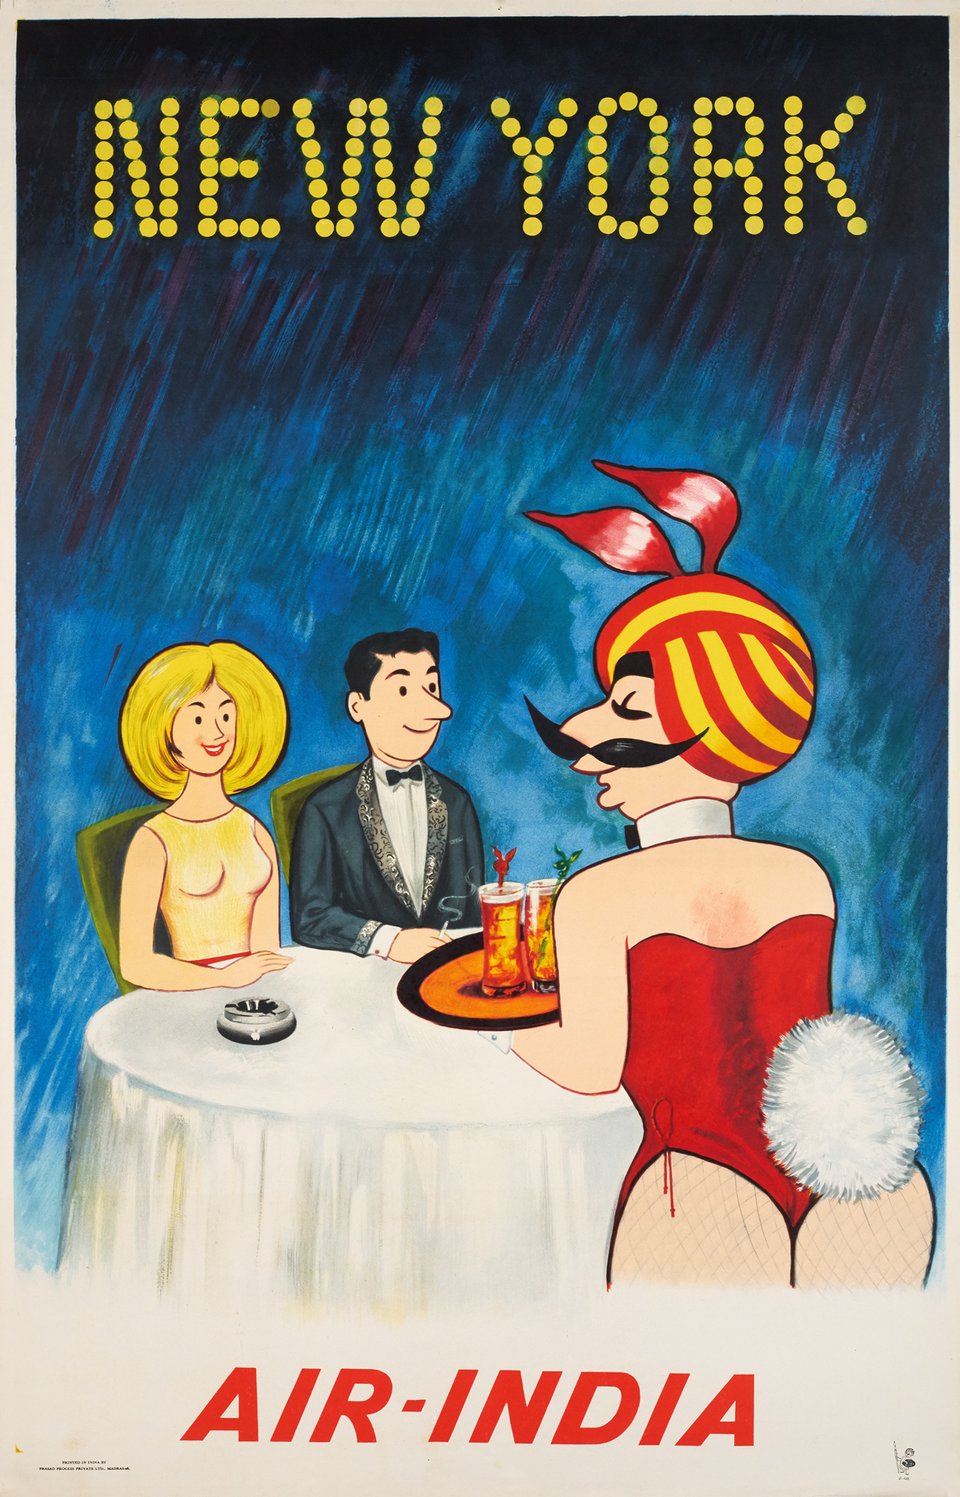 A poster of a man dressed as a playboy bunny serving cocktails to a couple.